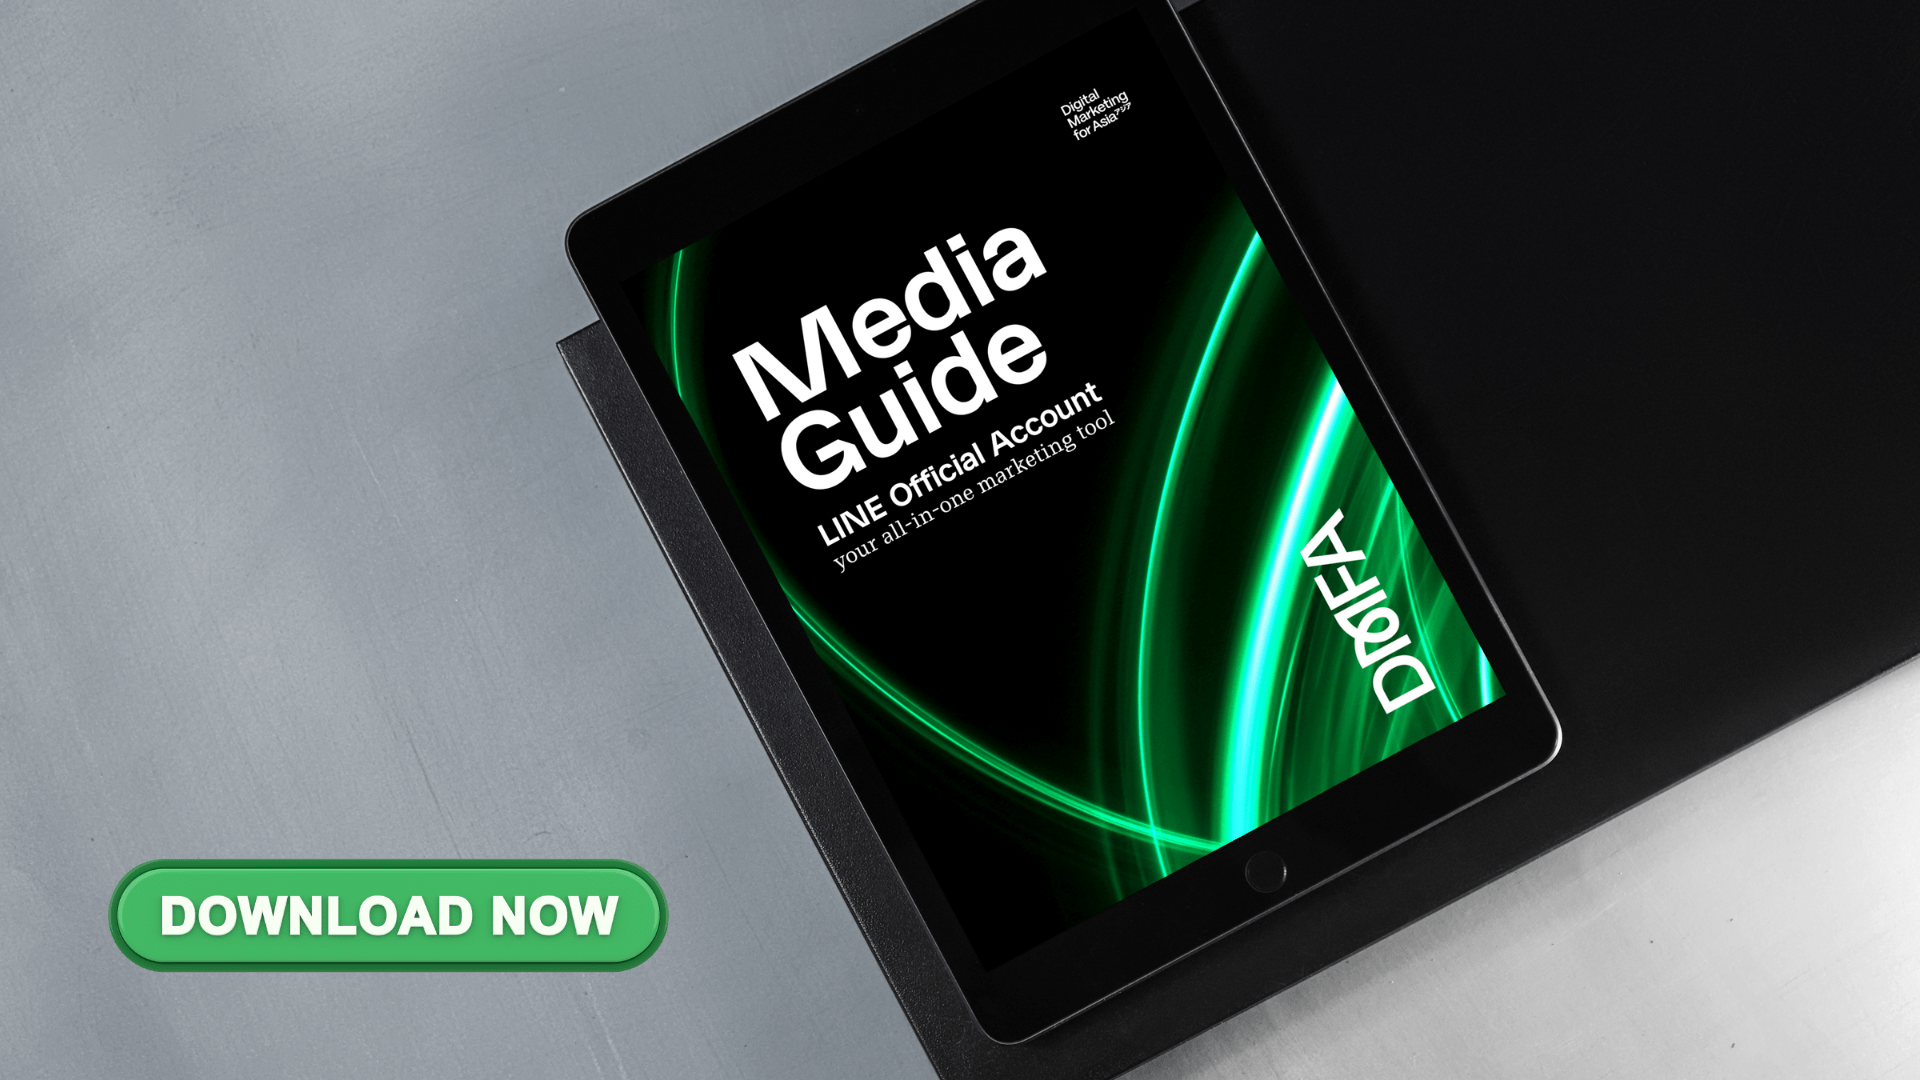 Download our free LINE Official Account Media Guide.